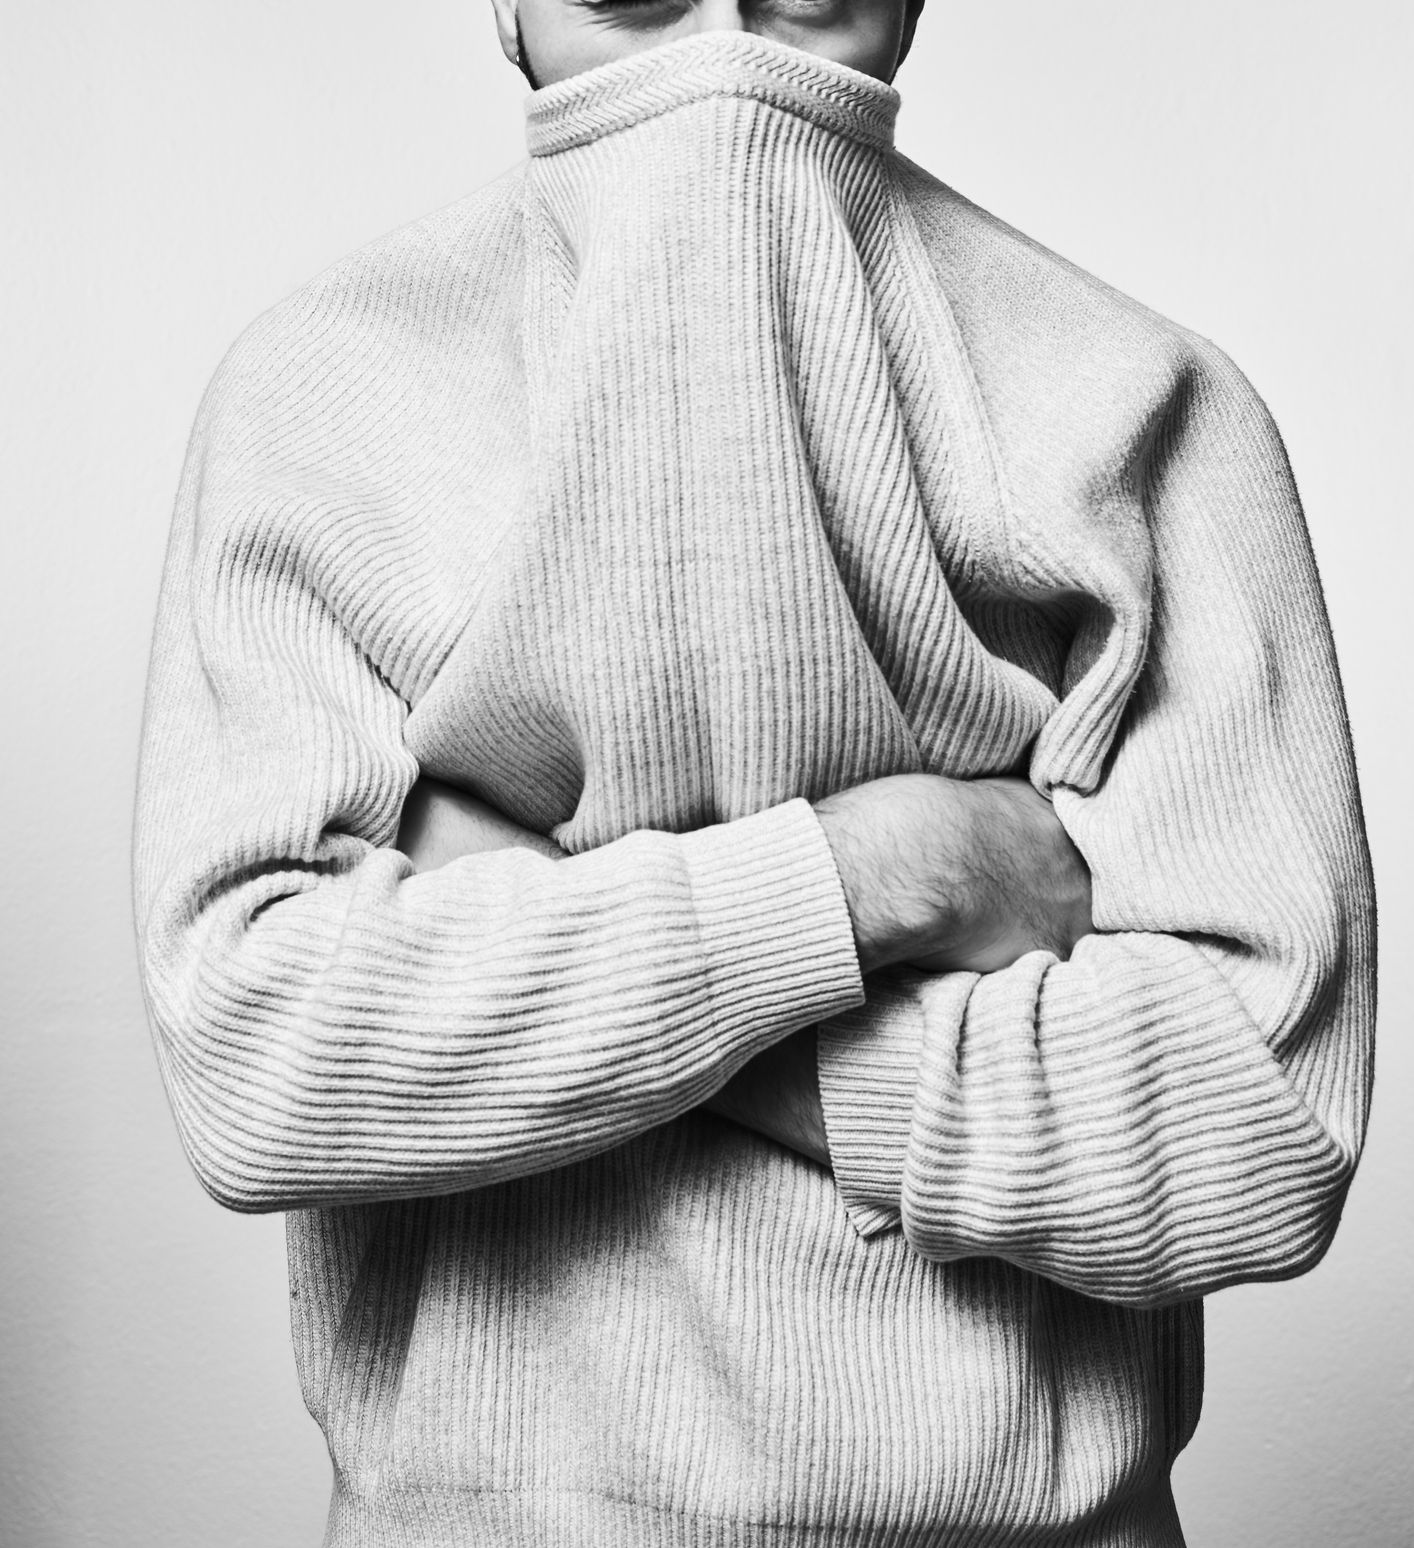 Man with jumper covering face